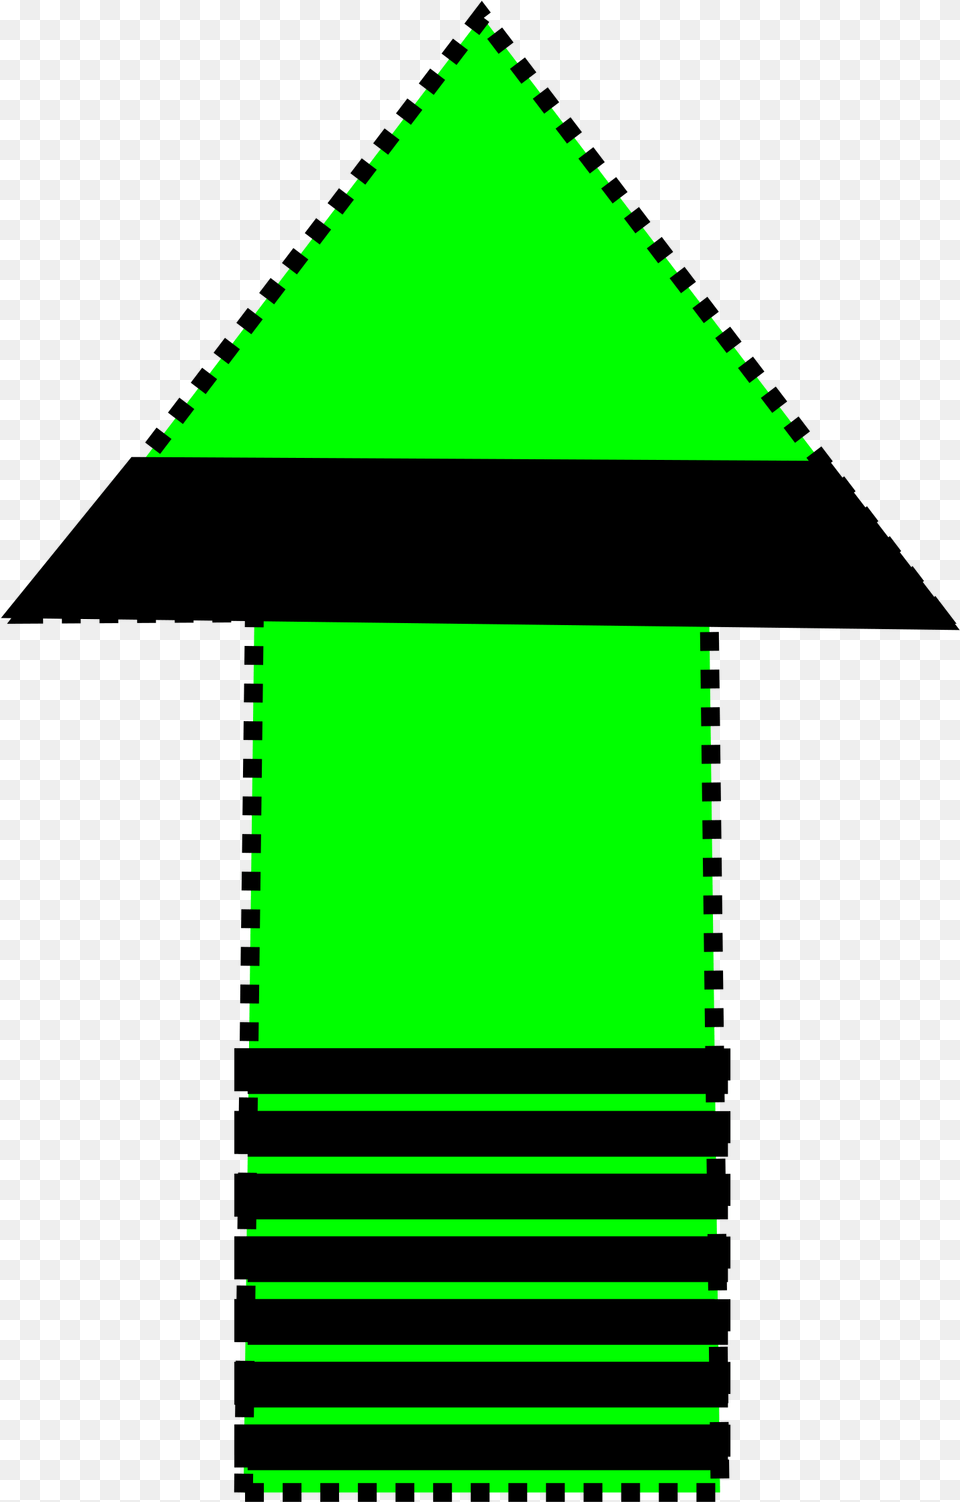 Green And Black Arrow Svg Freeuse Stock Triangle, Architecture, Building, Outdoors, Shelter Png Image